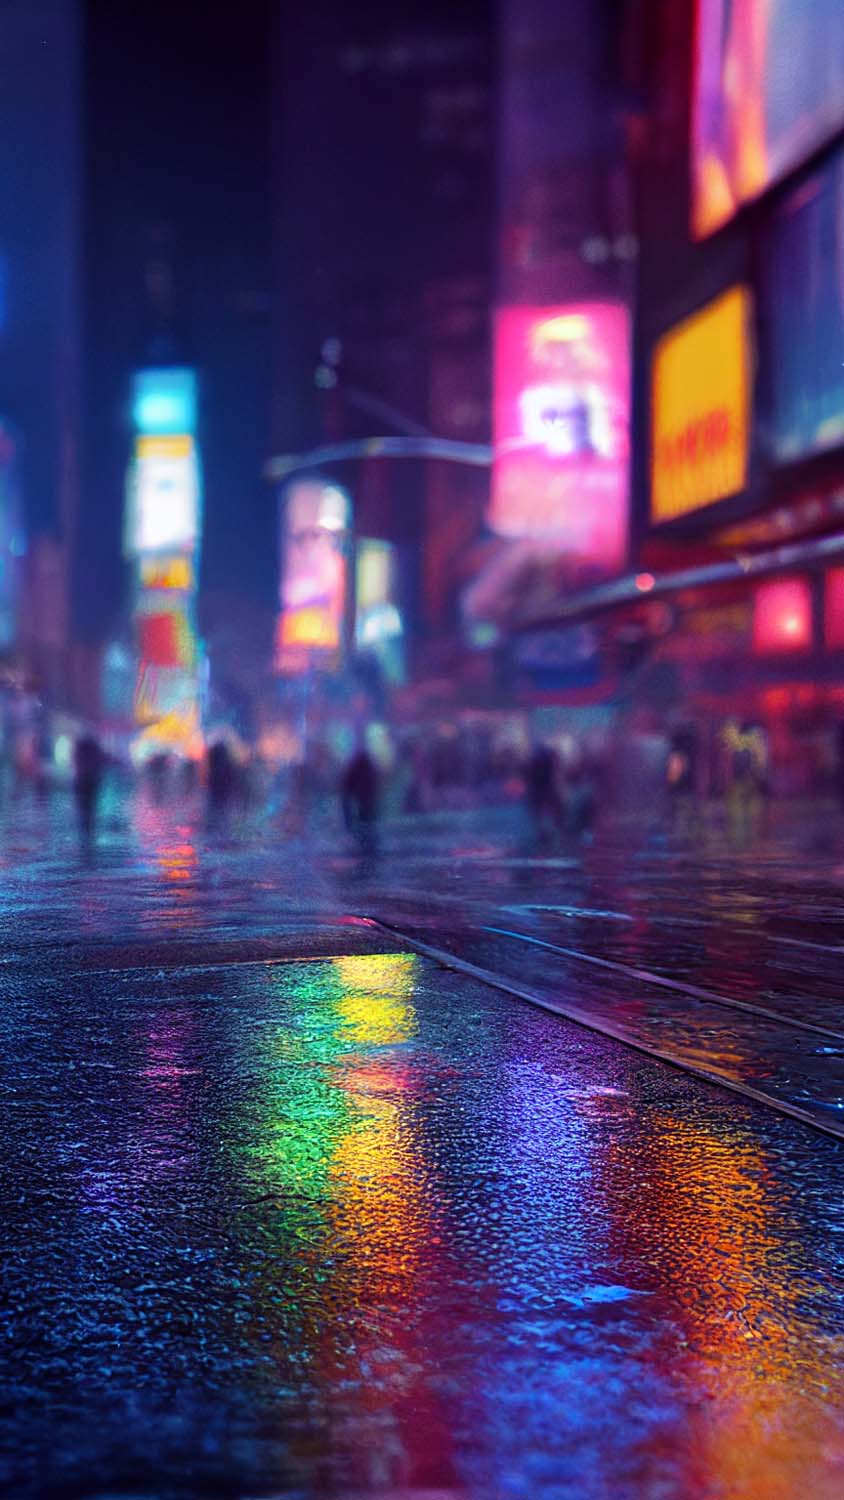 Times Square IPhone Wallpaper HD - IPhone Wallpapers : iPhone Wallpapers